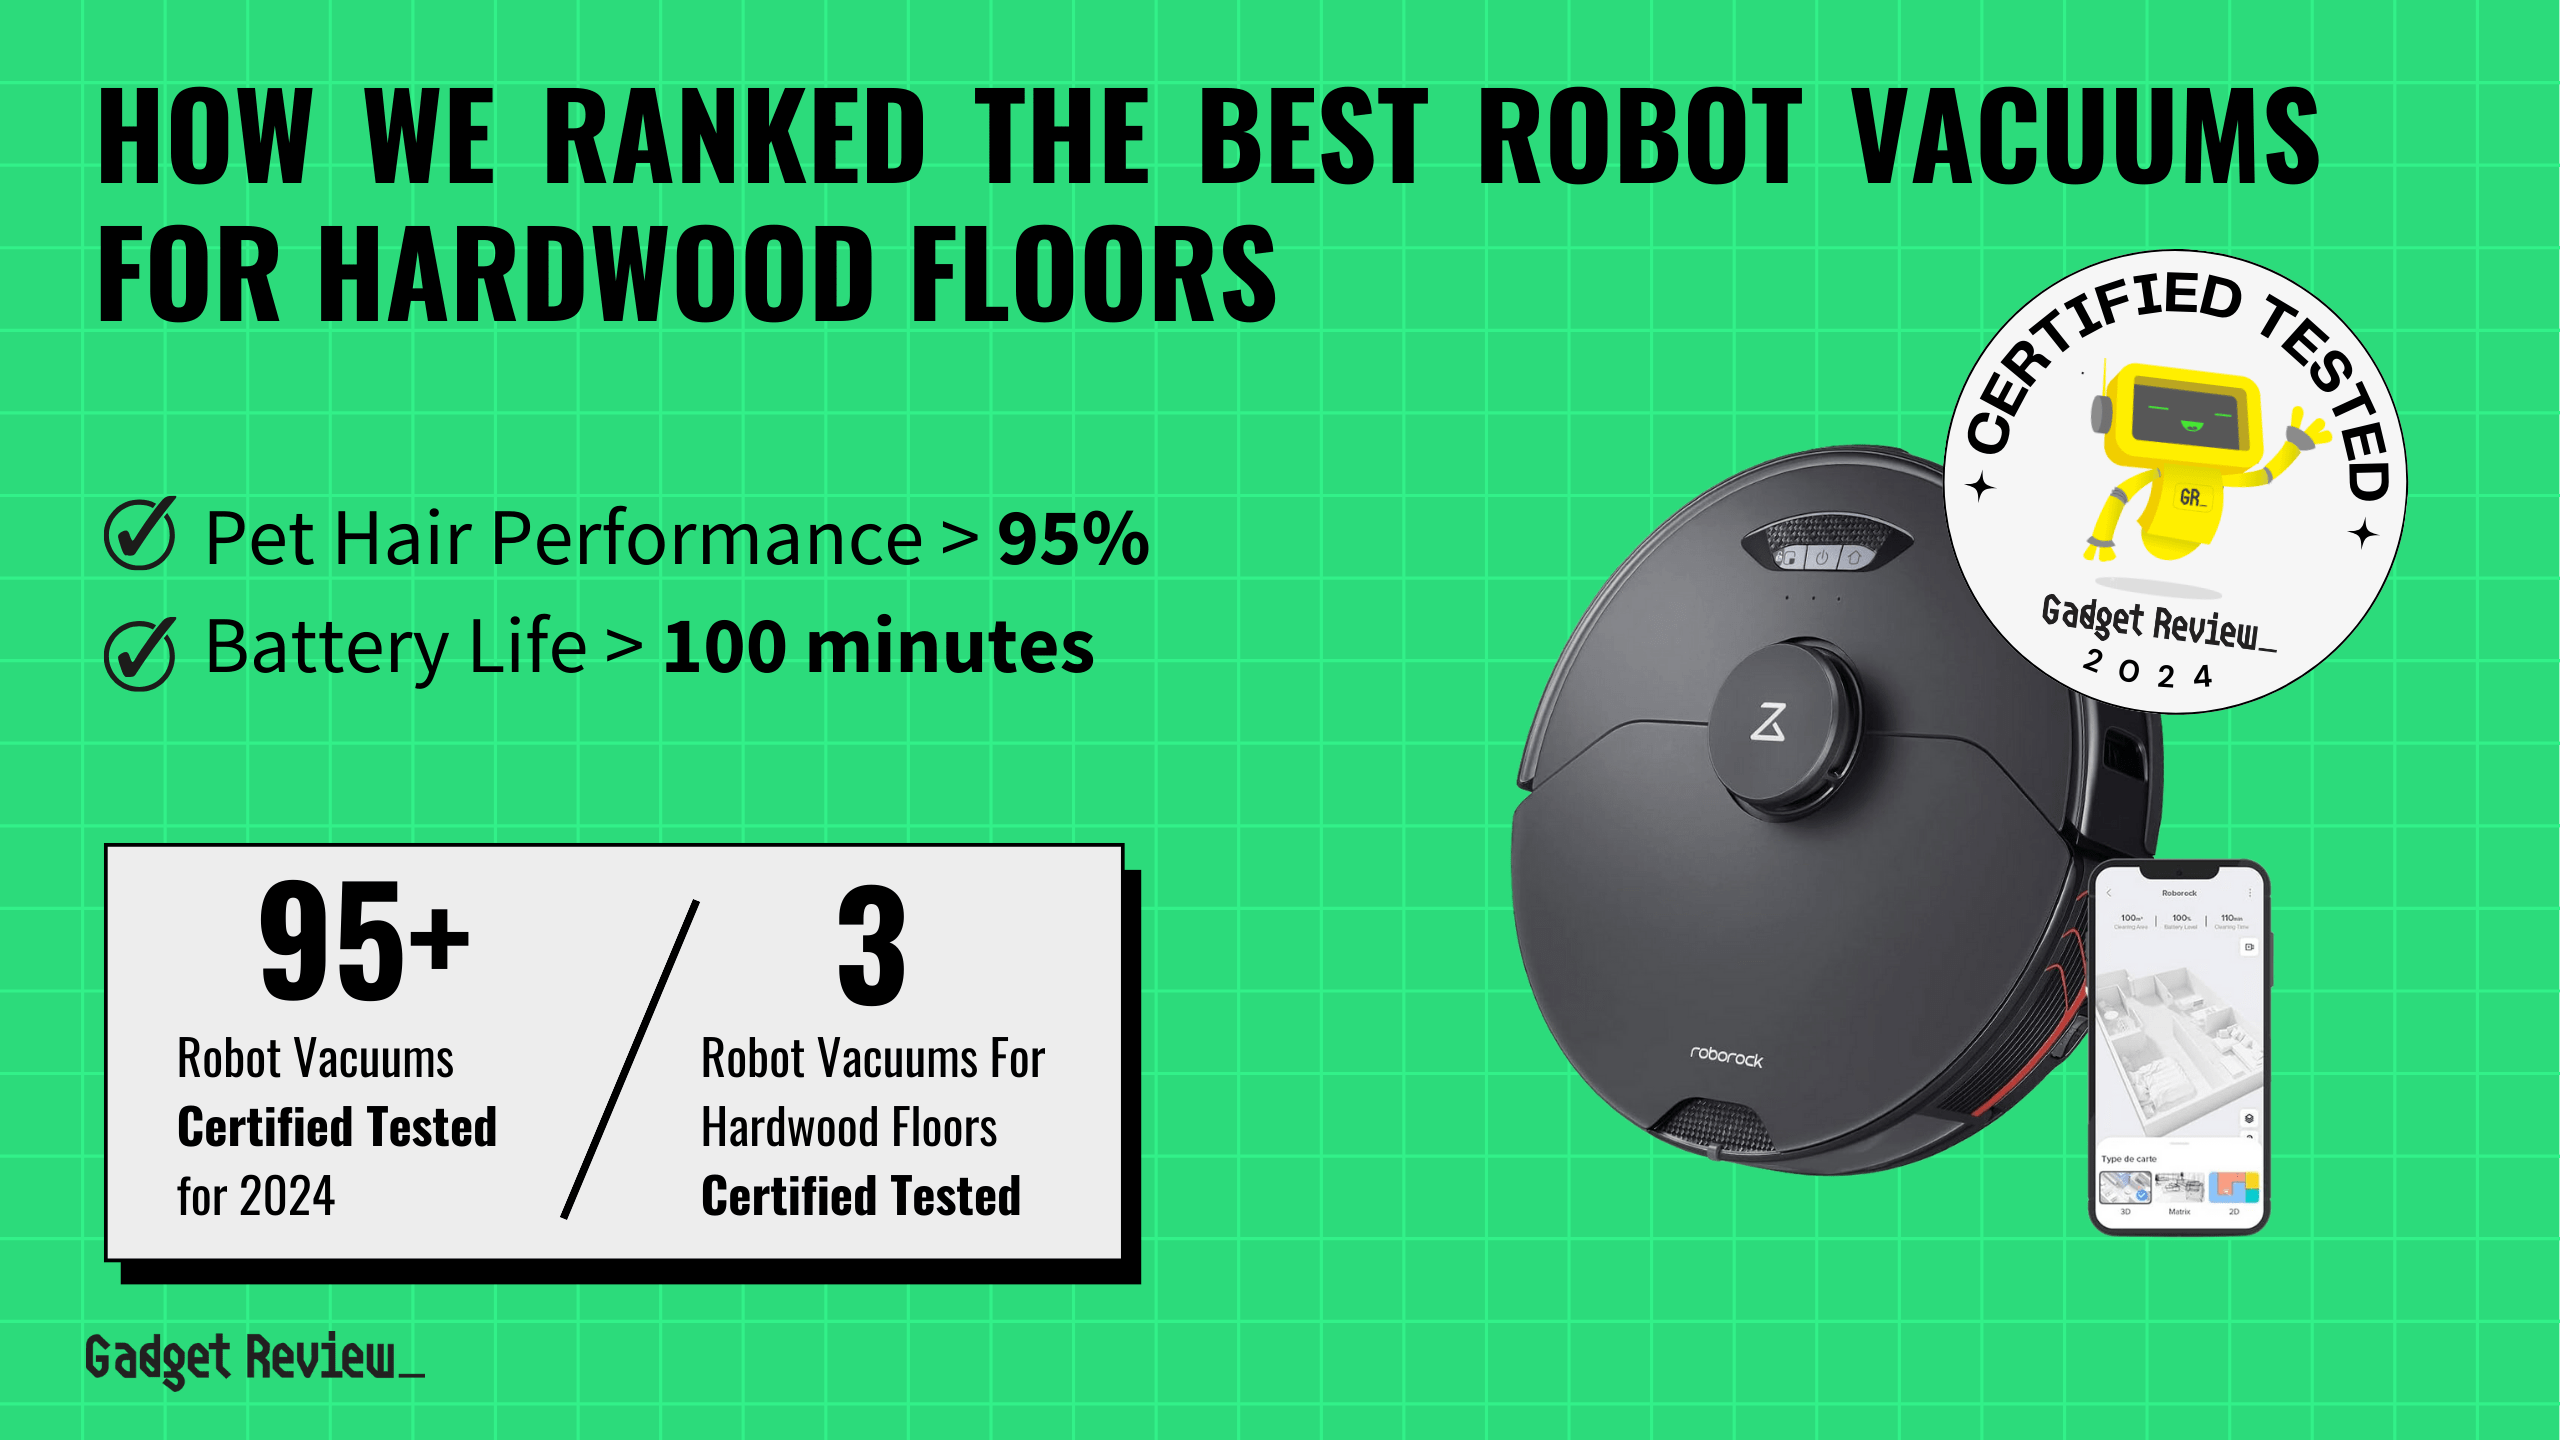 The 3 Best Robot Vacuums for Hardwood Floors in 2024